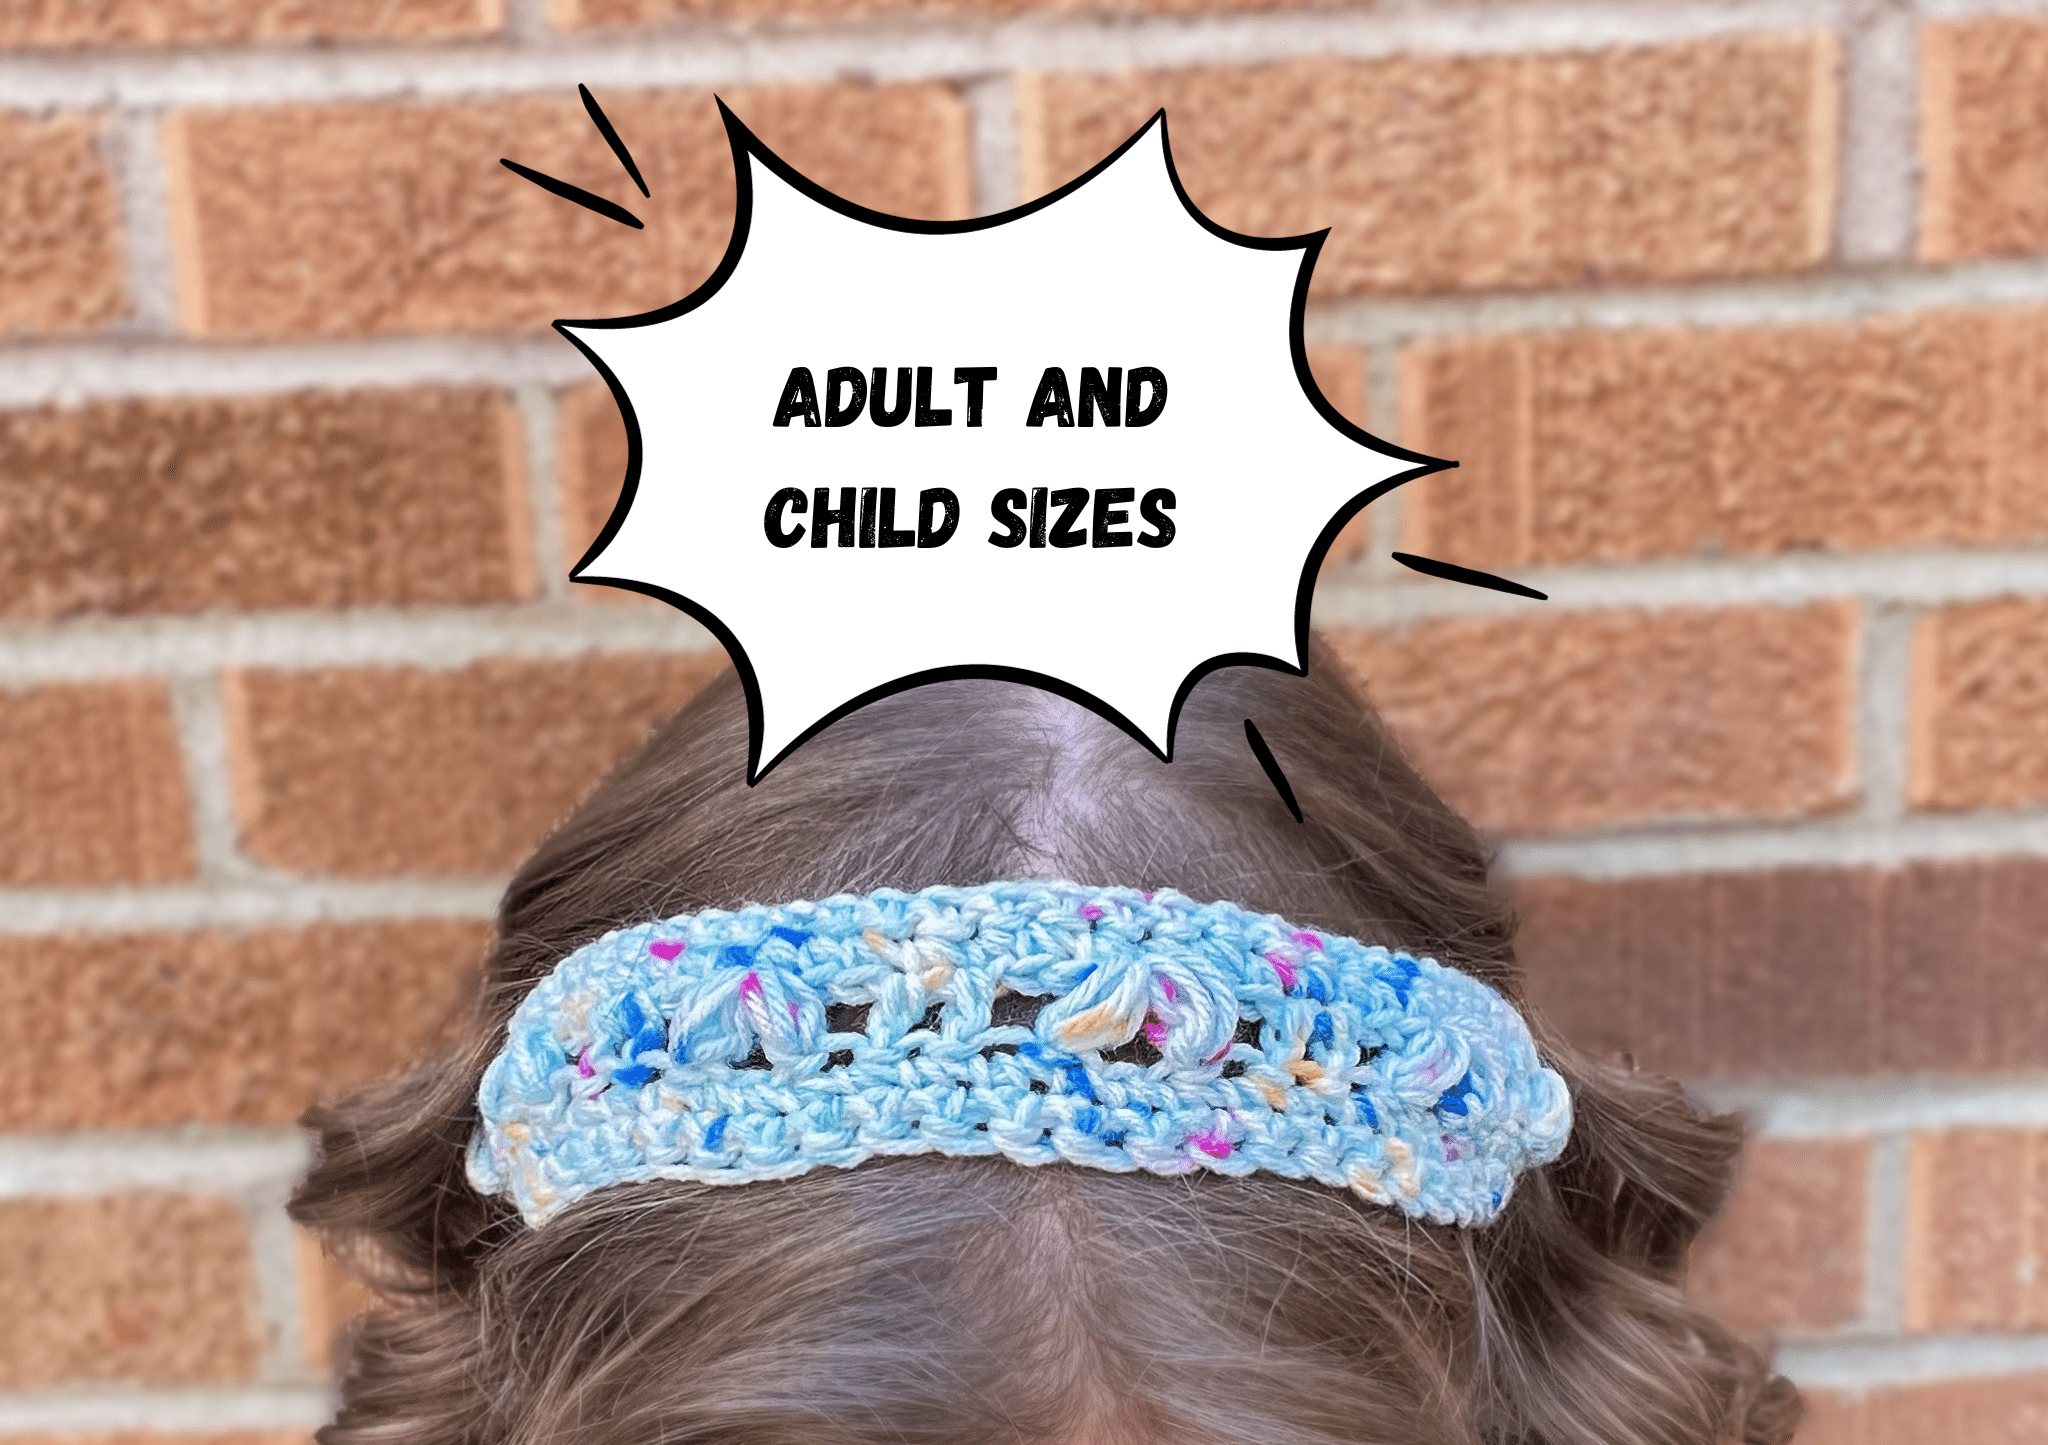 Harvest Stitch Headband with text adult and child sizes on it